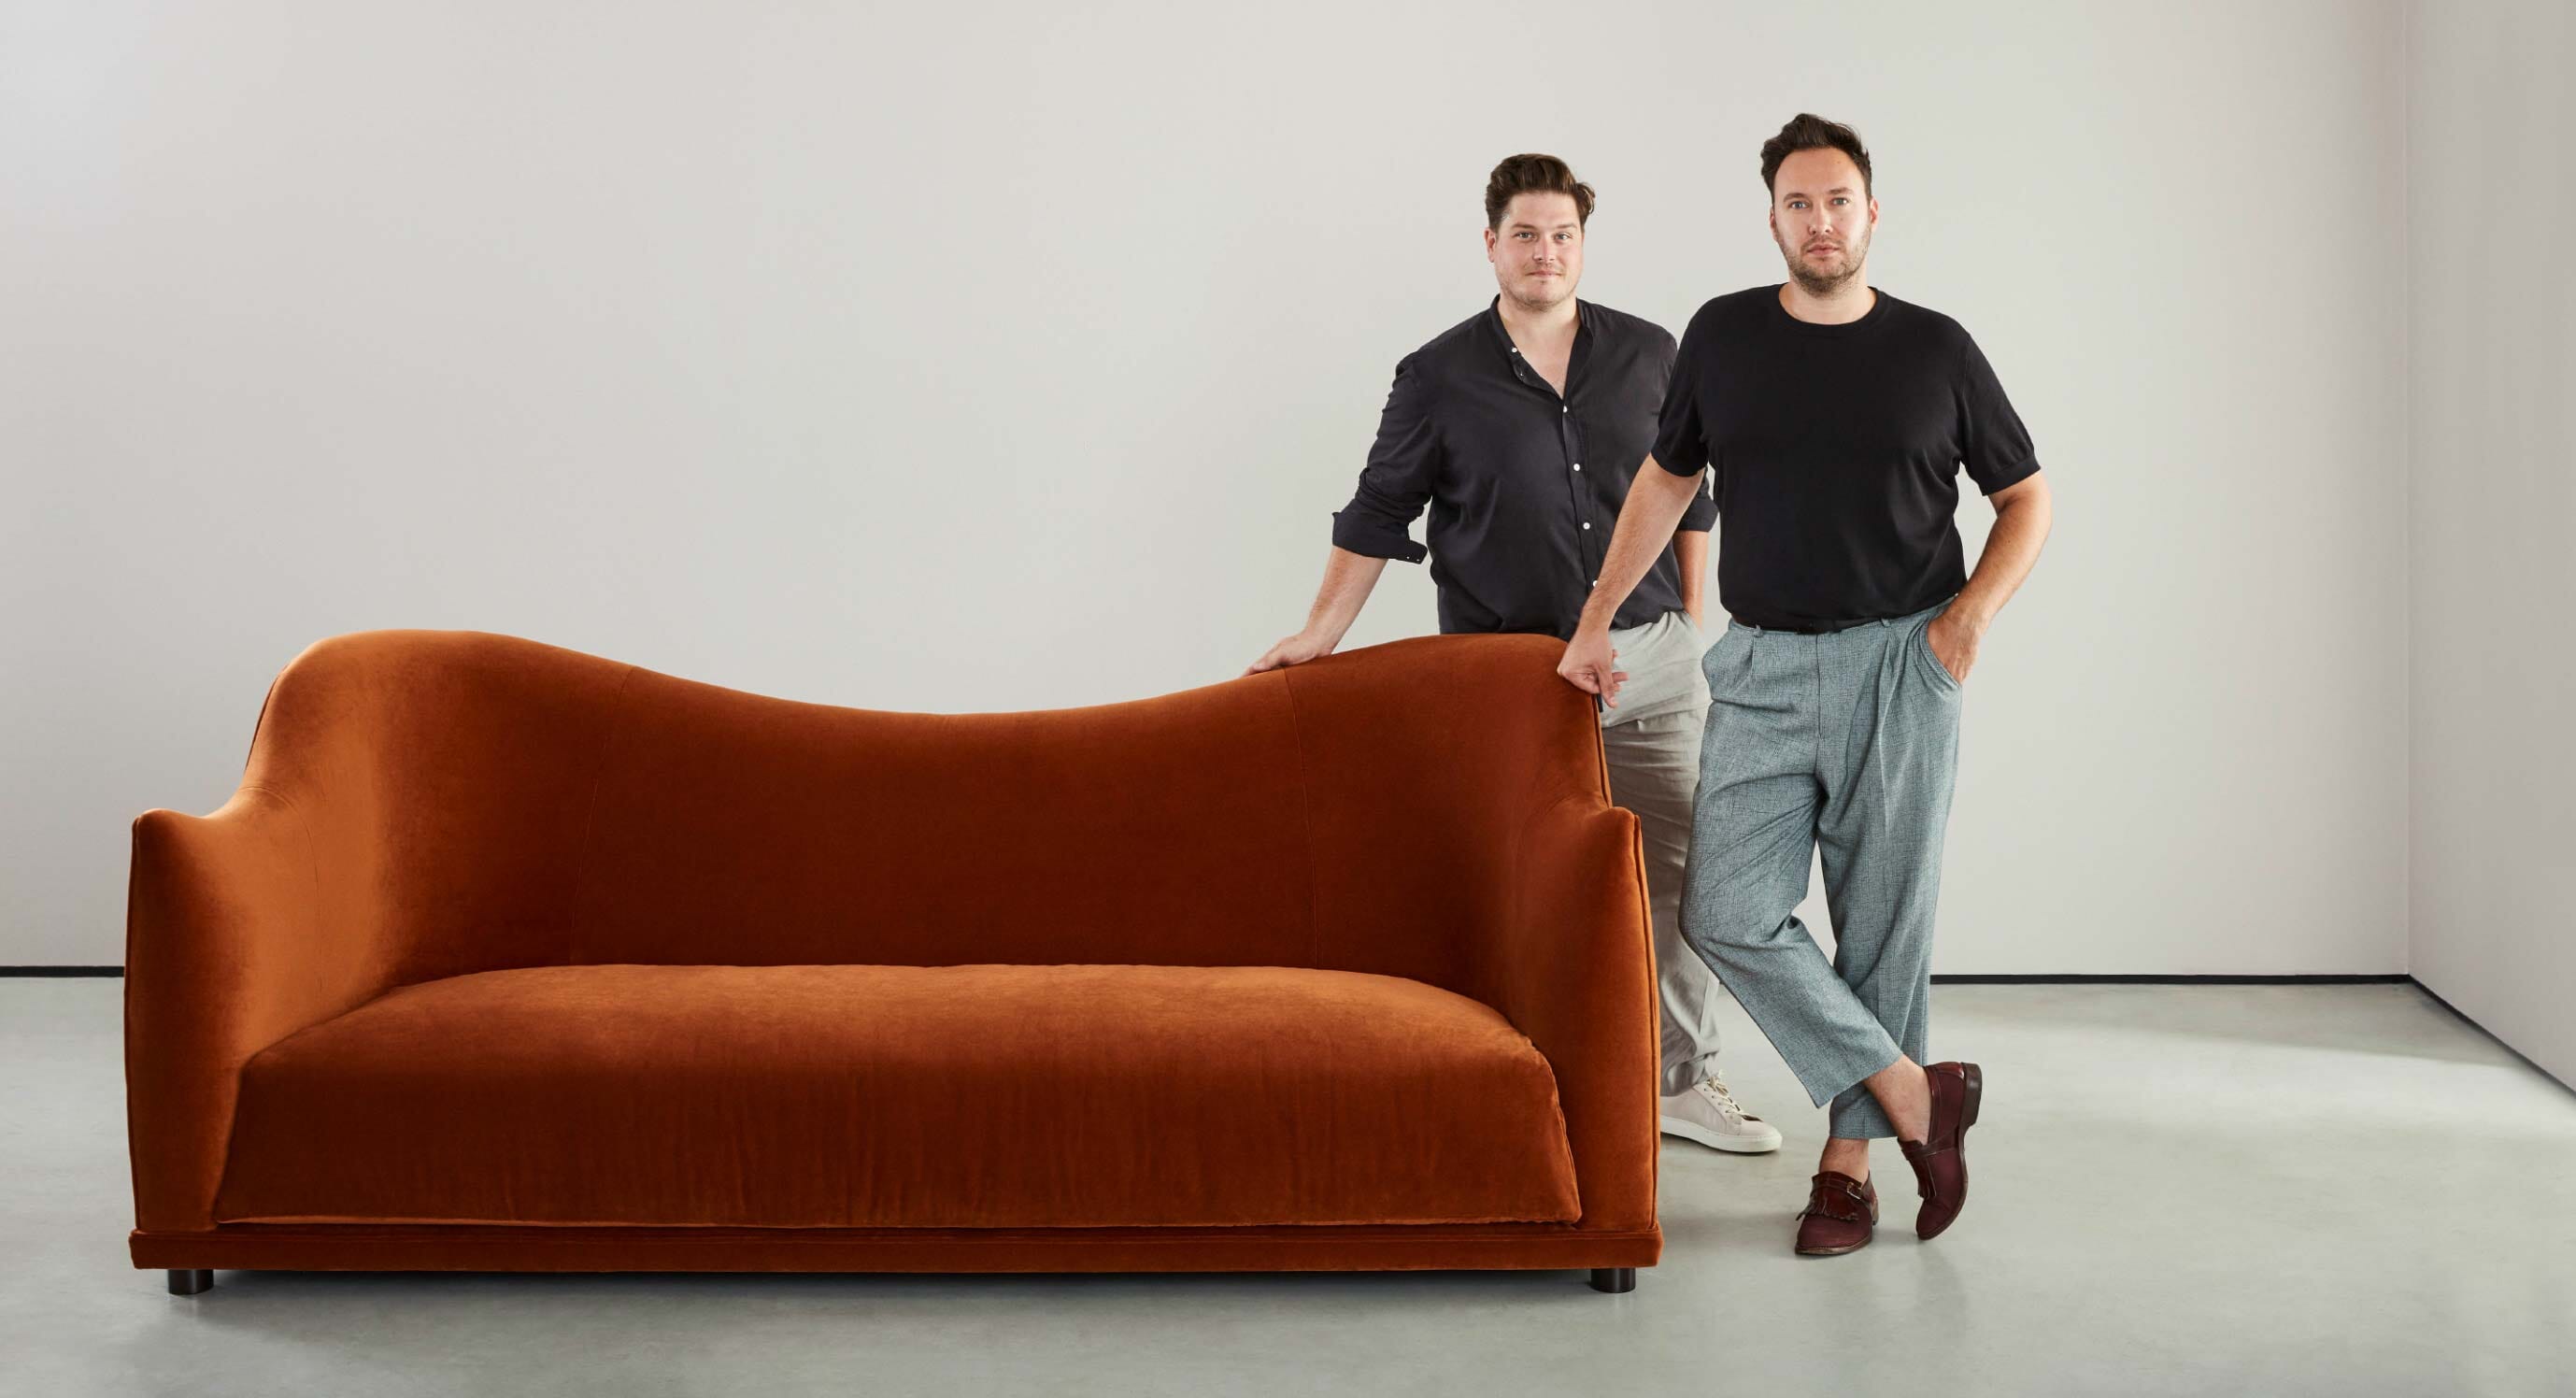 Design Firsts… with Jordan & Russell of 2LG Studio